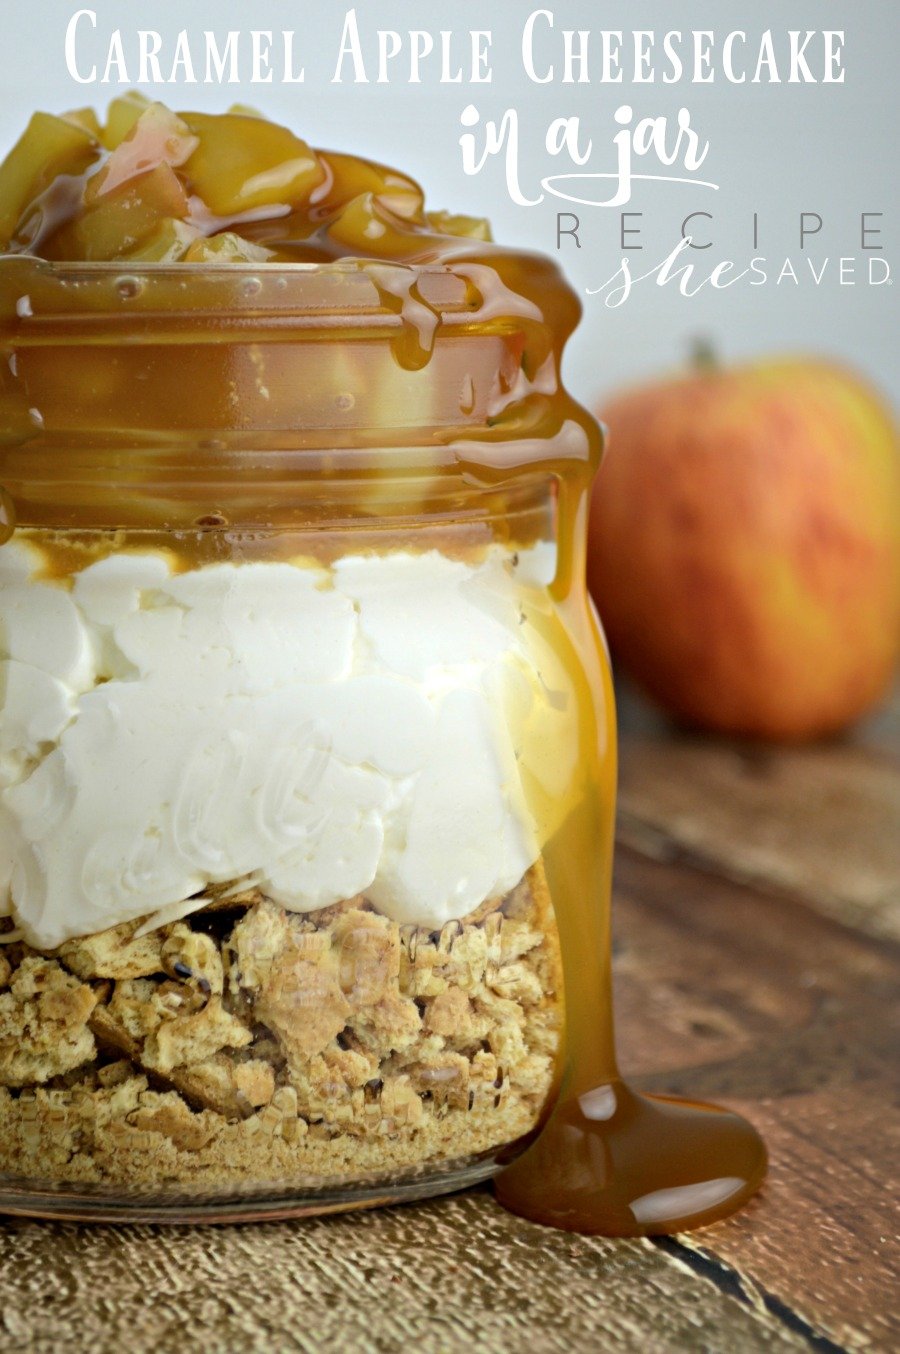 This Apple Cheesecake Recipe raises the bar, as it's a wonderful fall treat that's actually a Caramel Apple Pie in a jar!